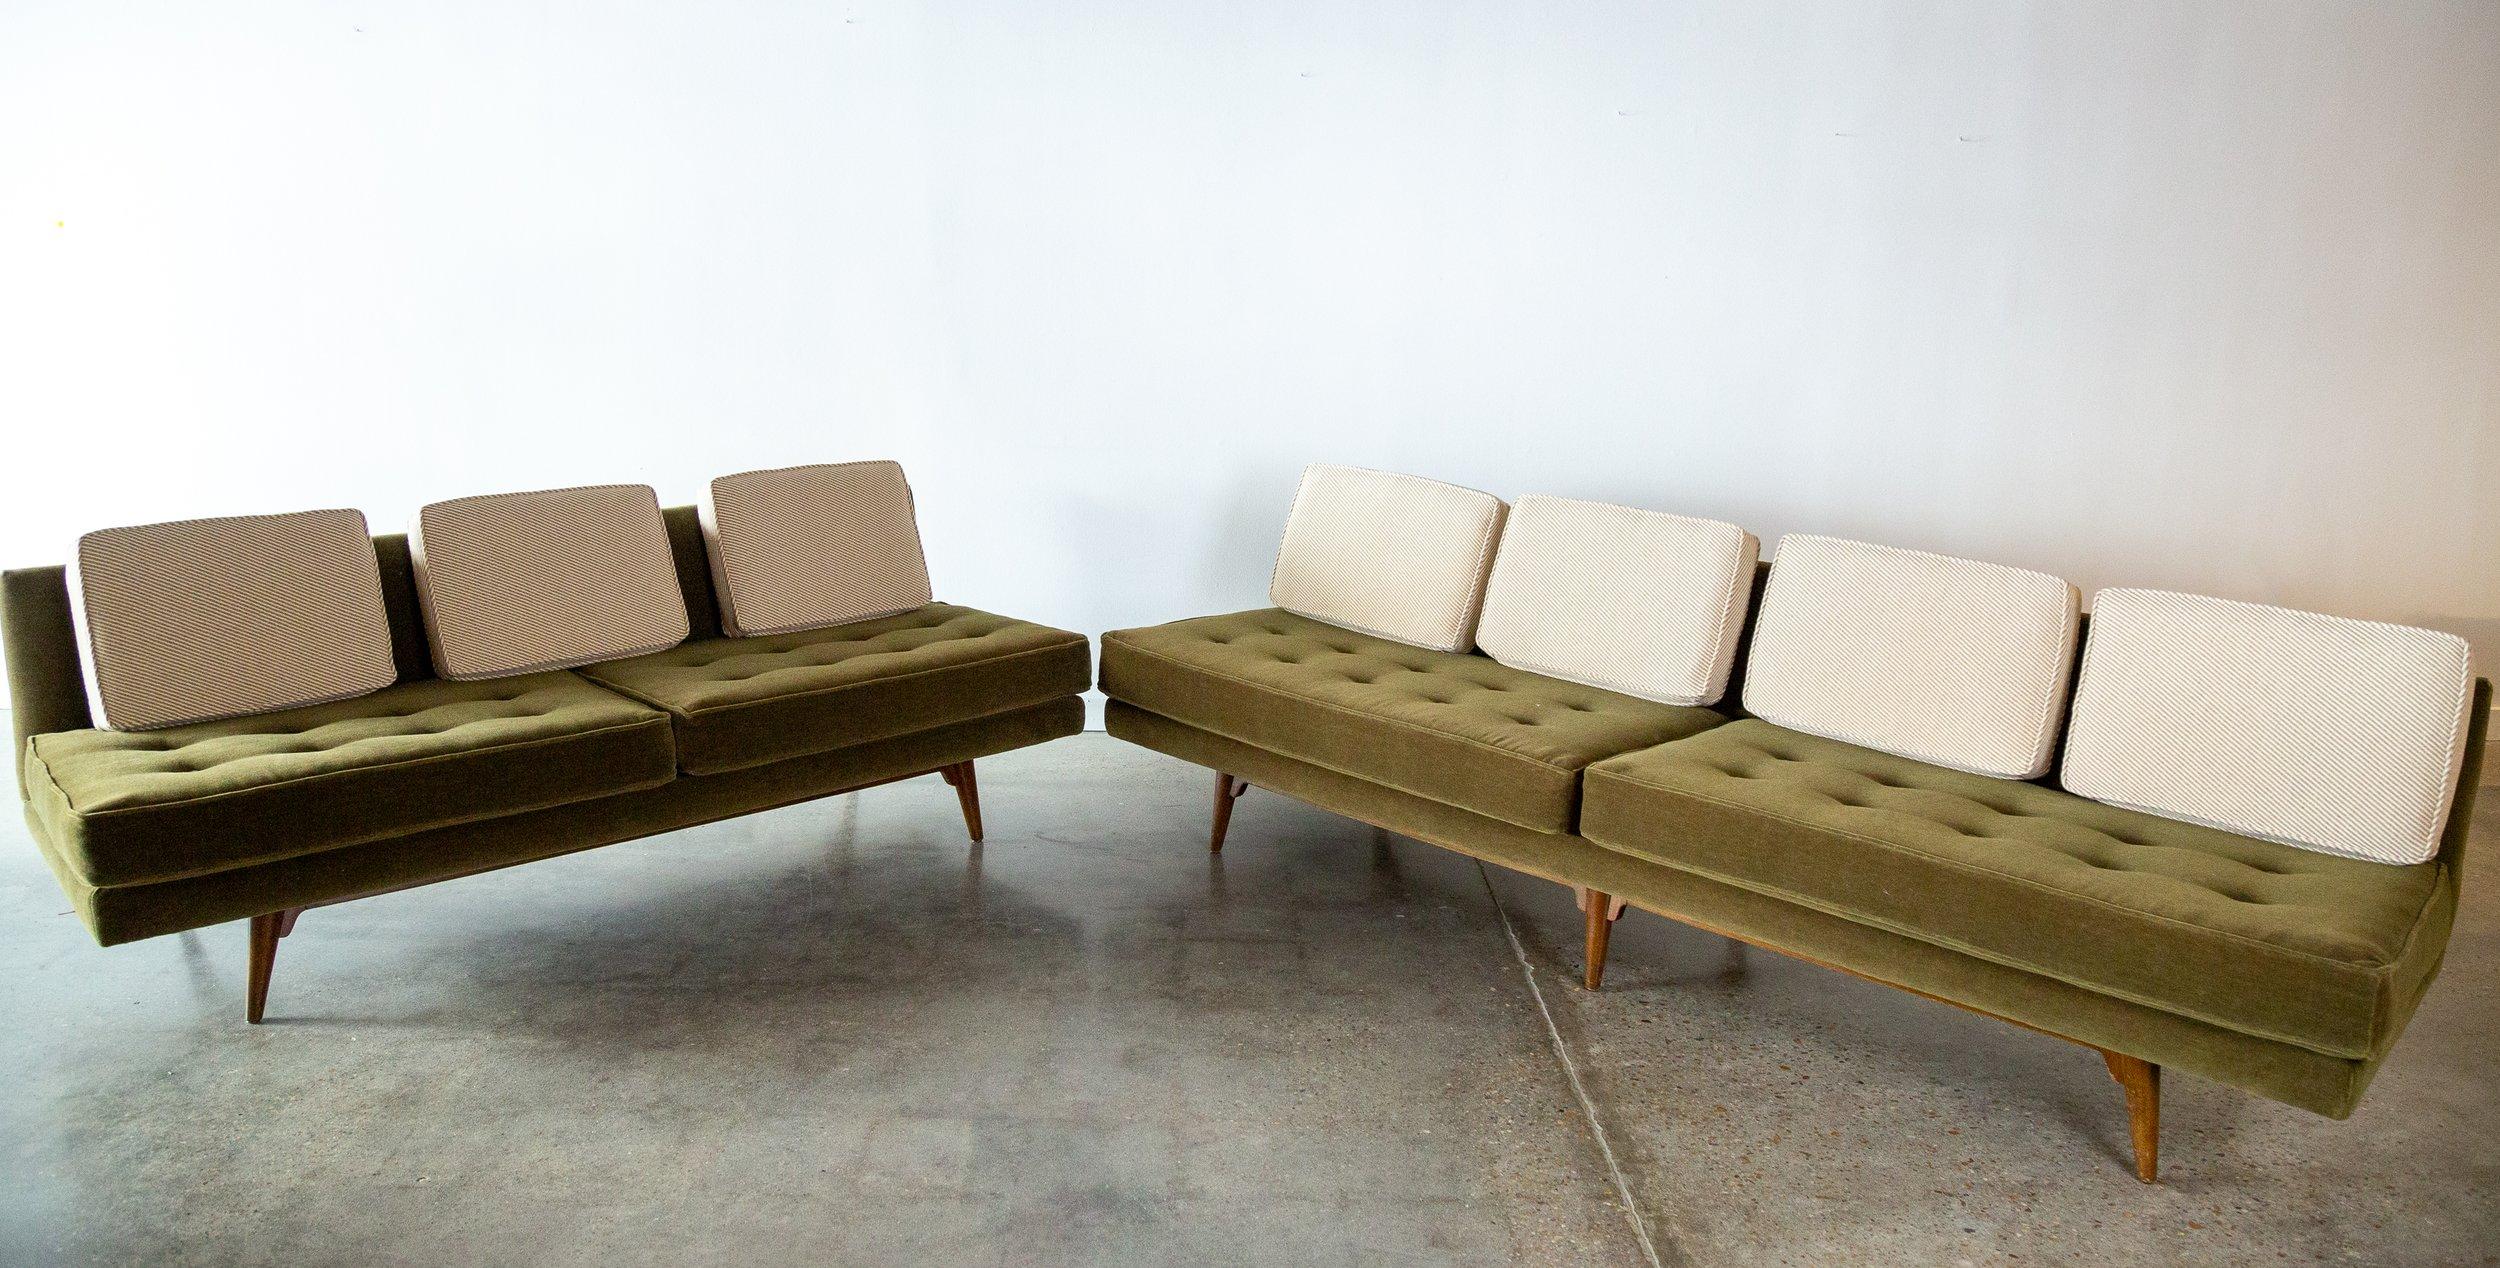 A pair of 1950s iconic armless sofas designed by Edward Wormley for Dunbar Furniture model 5526.  As a pair they form a nice L shape sectional.  Reupholstered in a green mohair base with neutral diagonal striped wool loose cushions.  A very airy